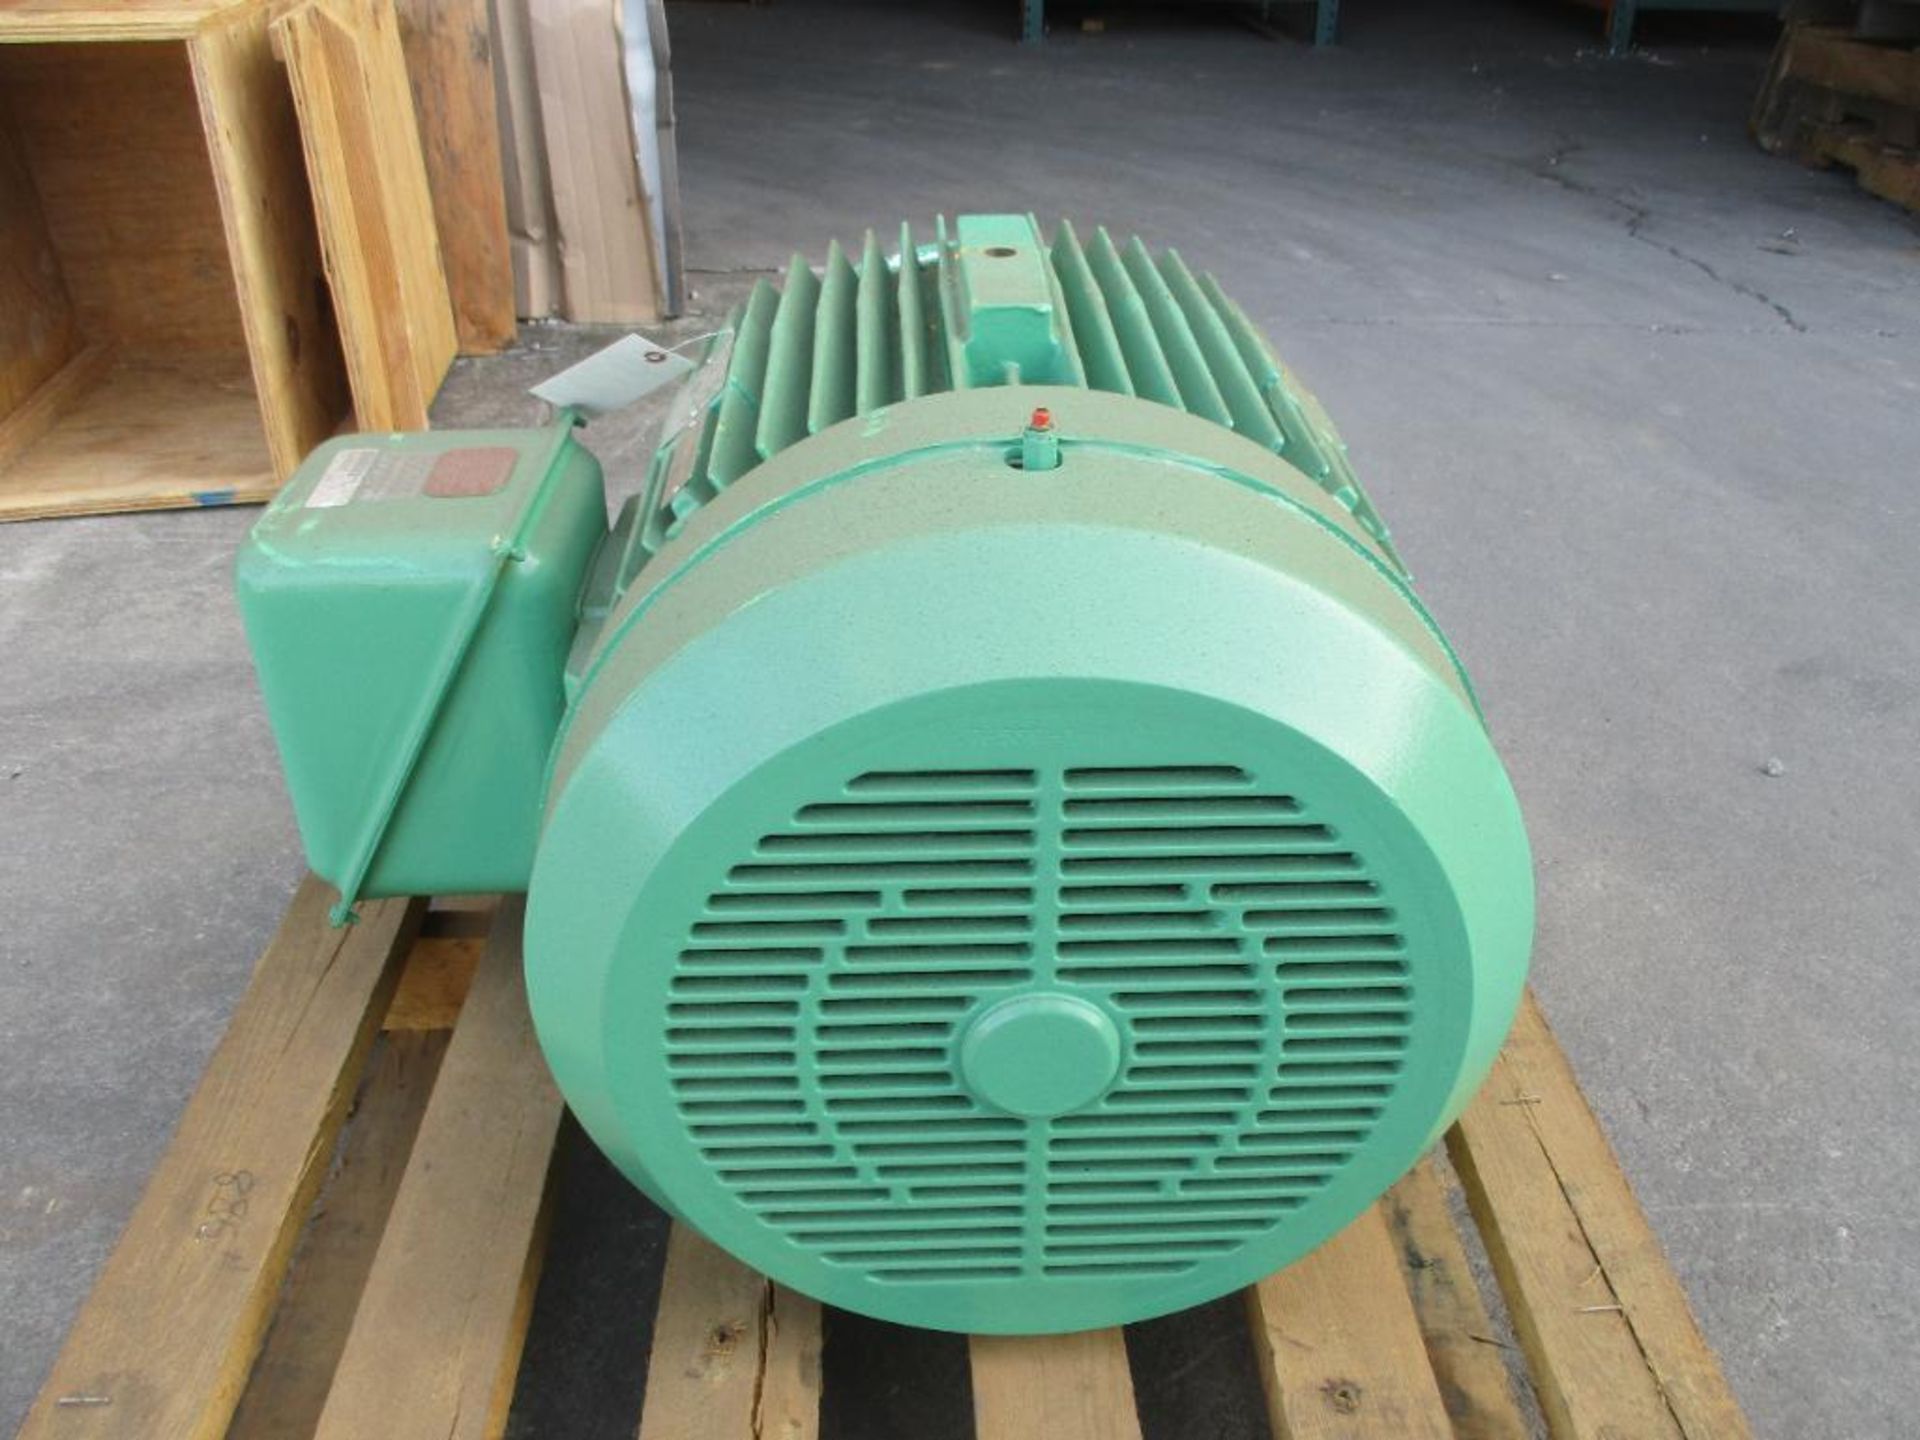 BALDOR 3 PHASE 60HP 1800RPM 364T FRAME A/C MOTOR P/N EM4314T 885# LBS (THIS LOT IS FOB KNOXVILLE TN) - Image 4 of 5